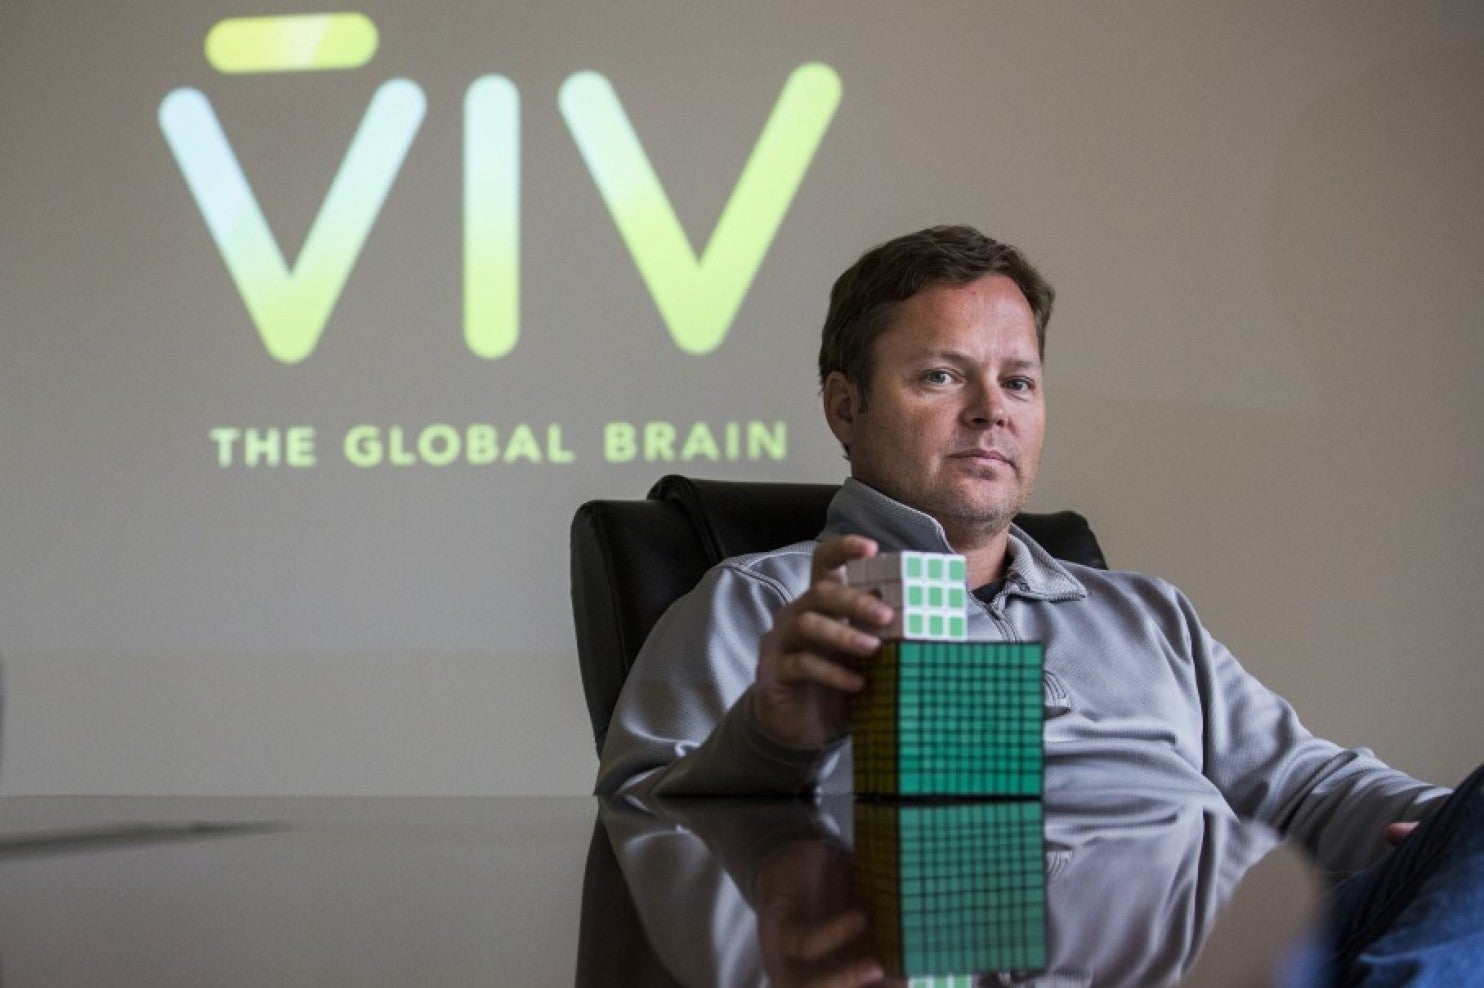 Dag Kittlaus and his team previously built Siri, which was acquired by Apple in 2010. Now they are back at it again with Viv